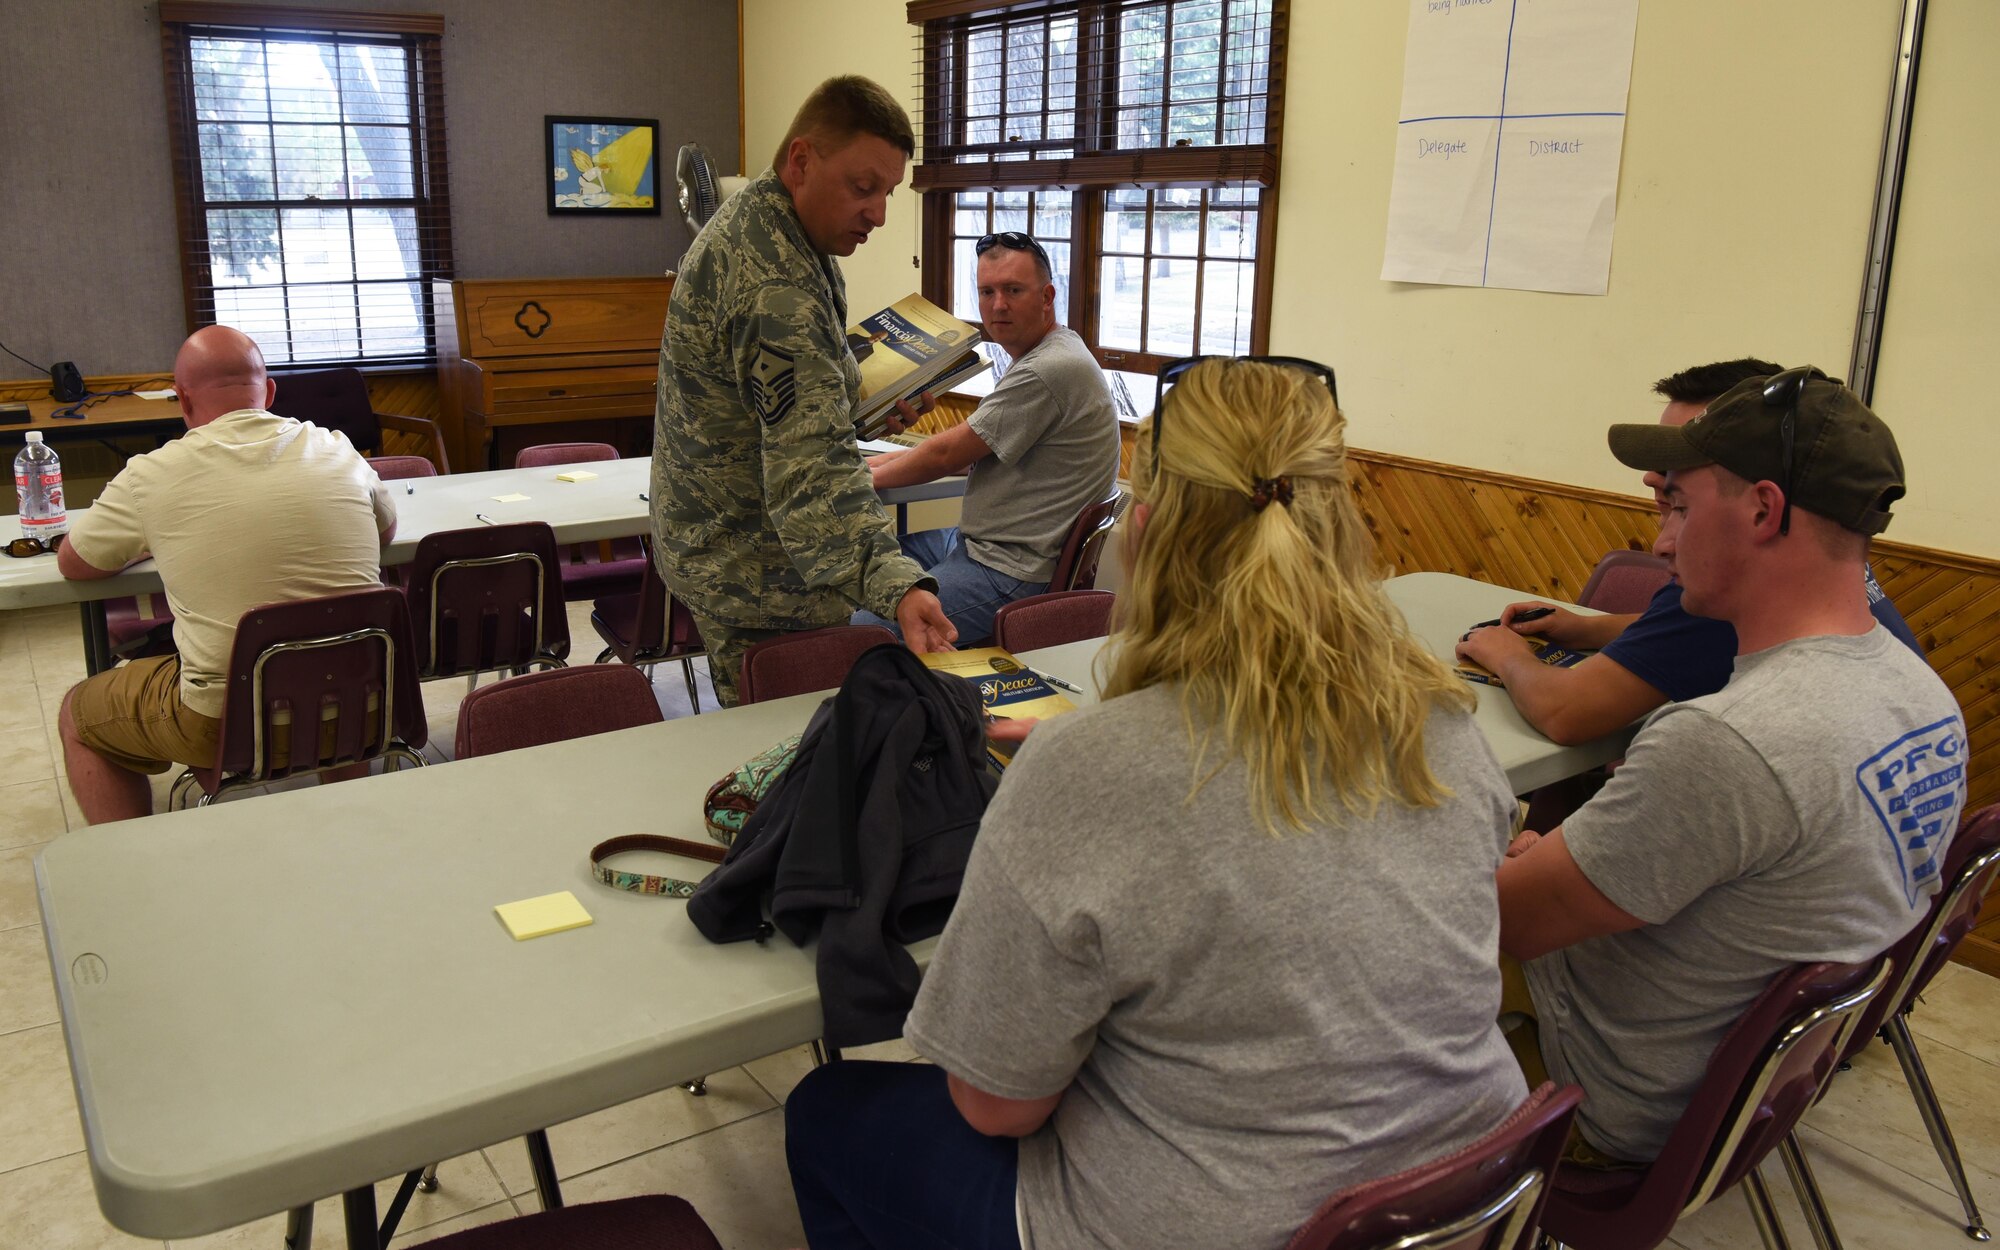 Master Sgt. Brandon Finefrock, 90th Missile Security Forces Squadron first sergeant, passes out Financial Peace University workbooks to students on F.E. Warren Air Force Base, Wyo., Sept. 7, 2016. Students followed along with a video and learned how to manage their personal finances. (U.S. Air Force photo by Airman 1st Class Breanna Carter)